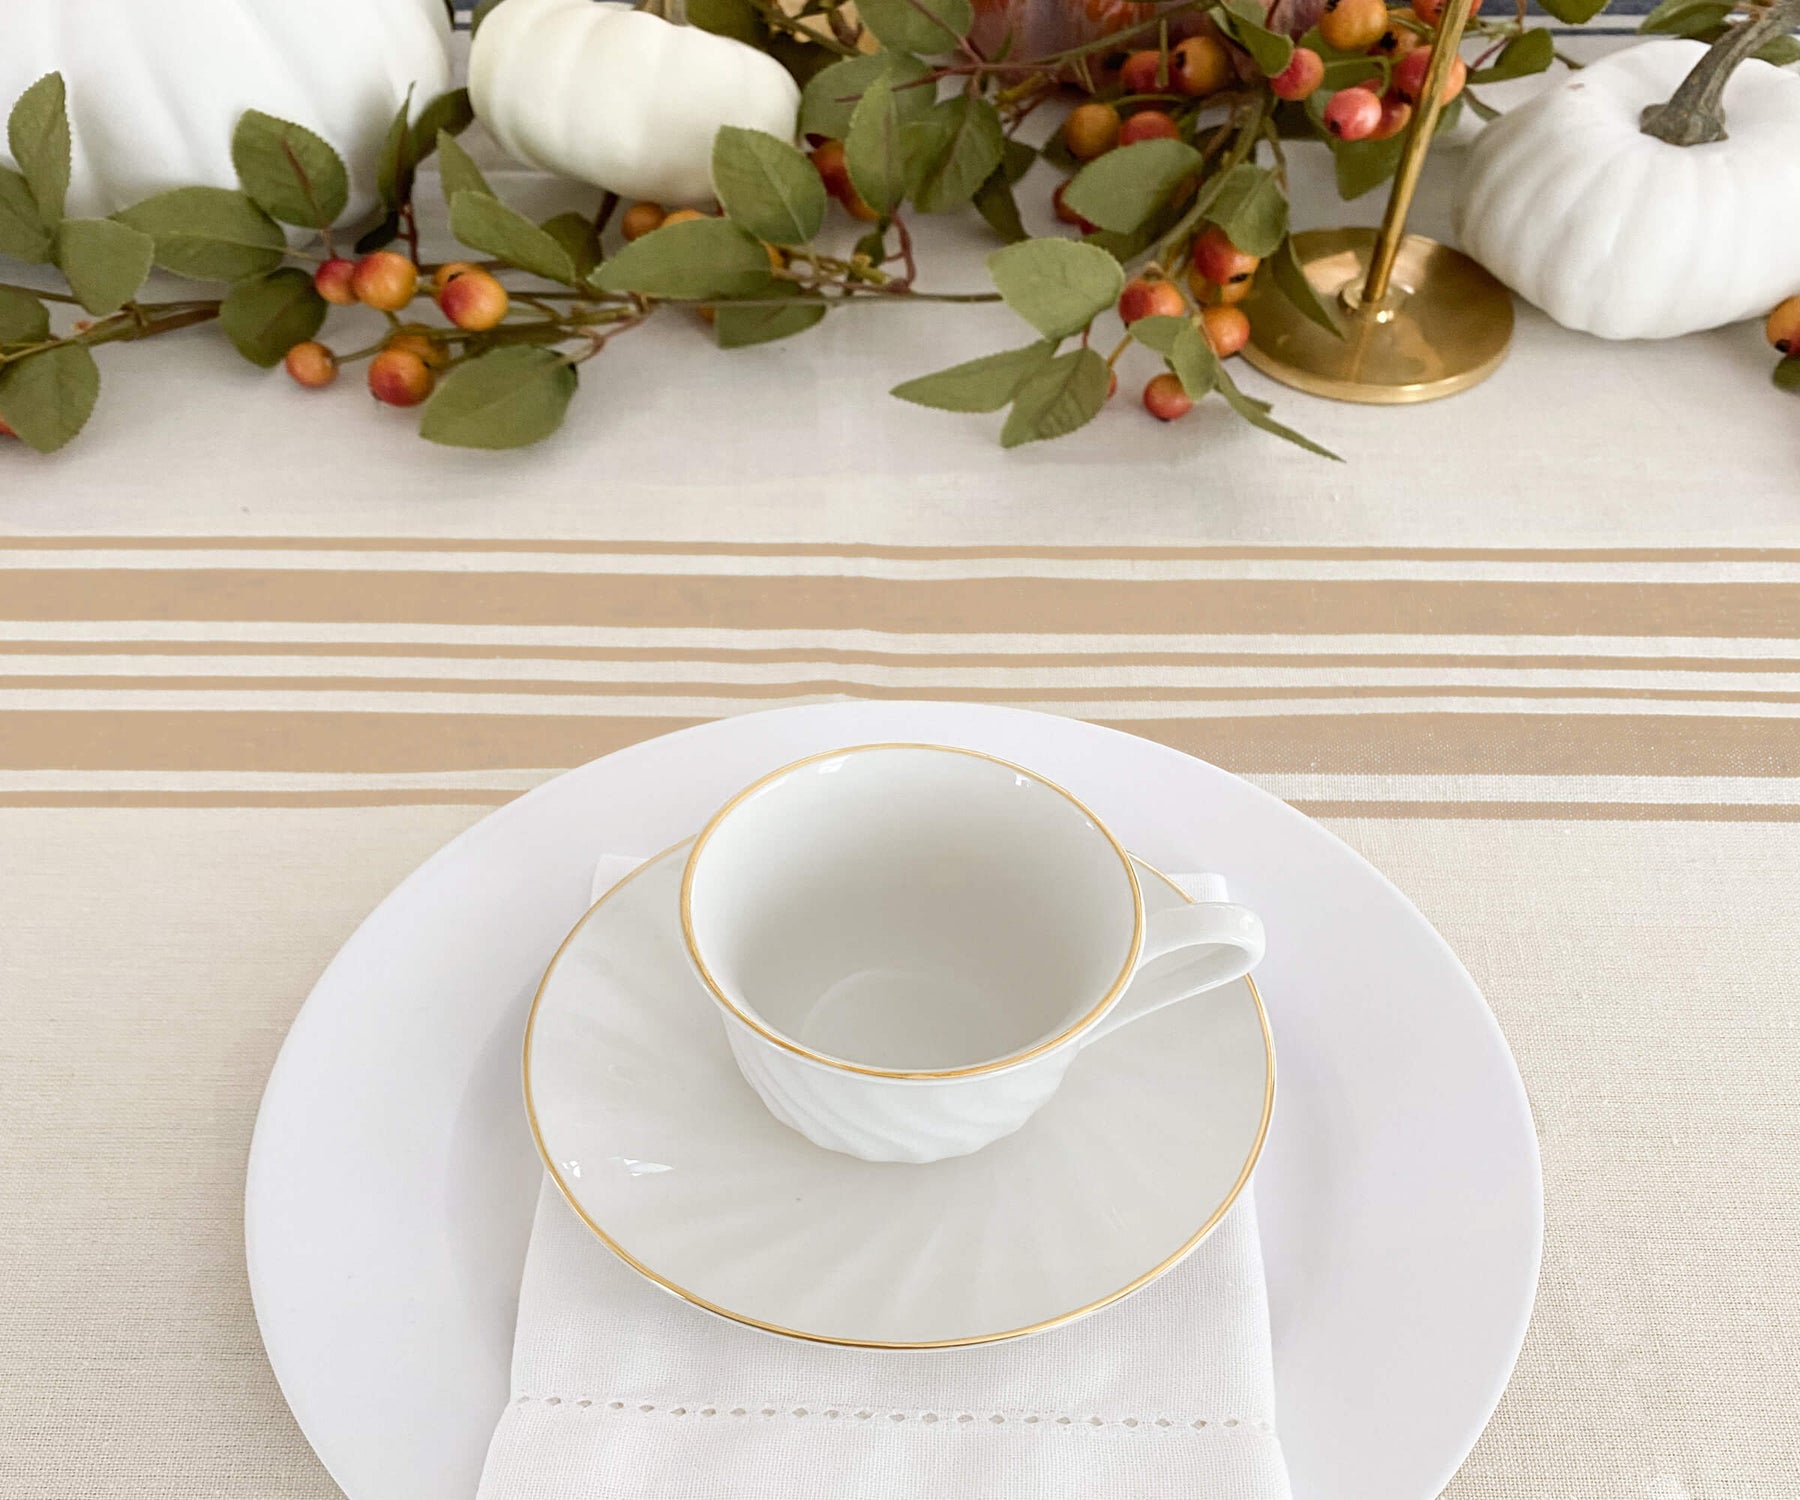 Farmhouse tablecloth with golden cup on top